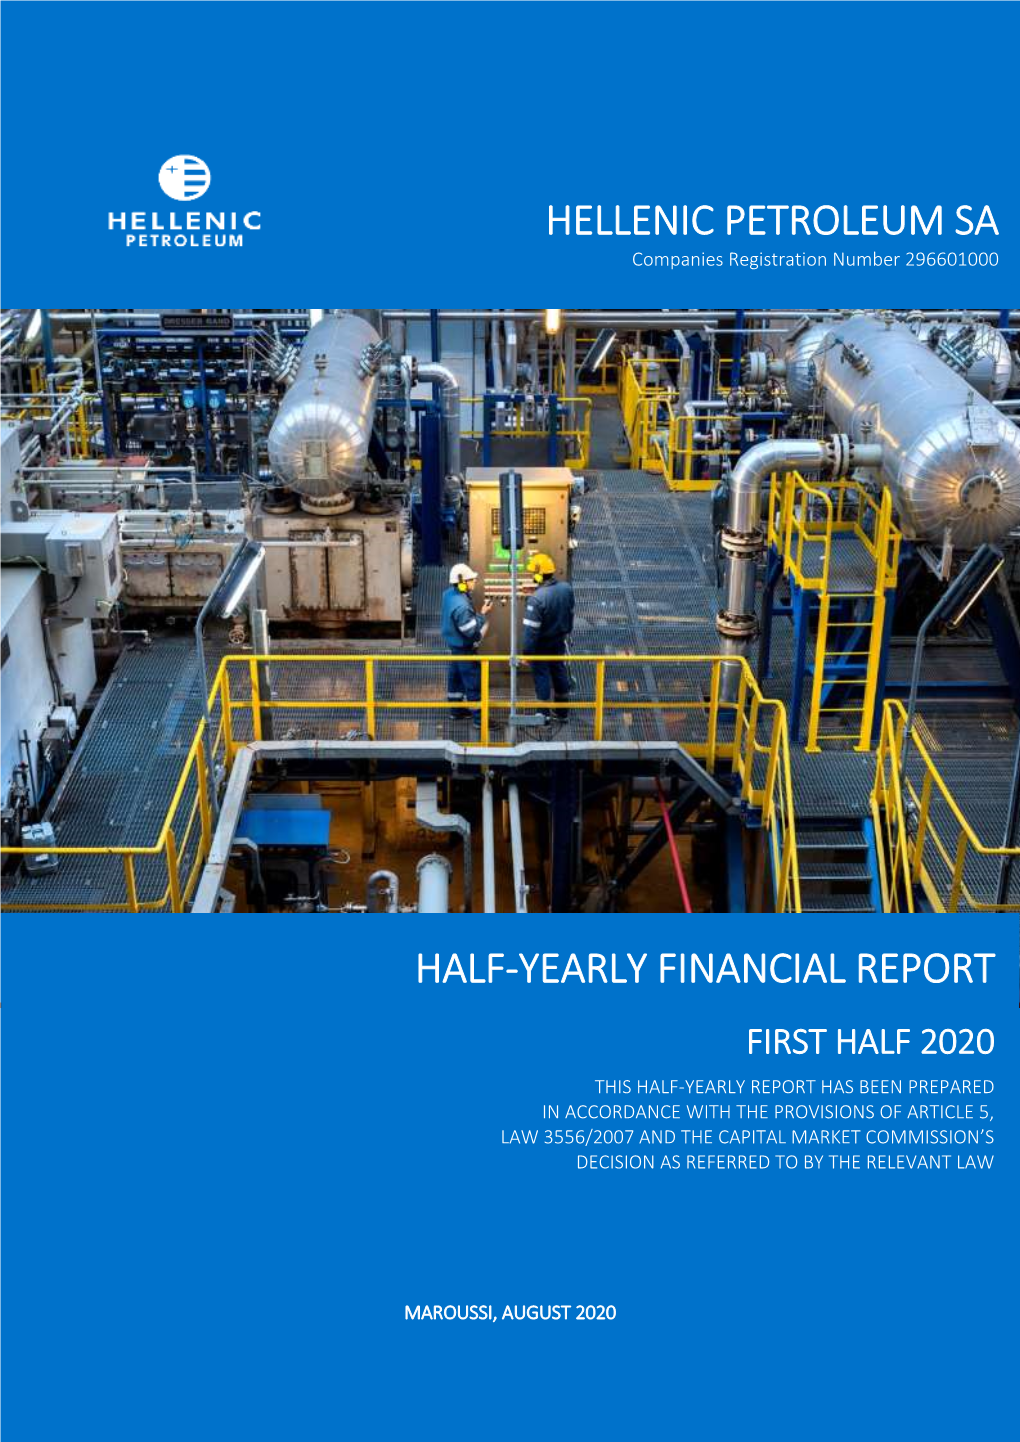 Half-Yearly Financial Report